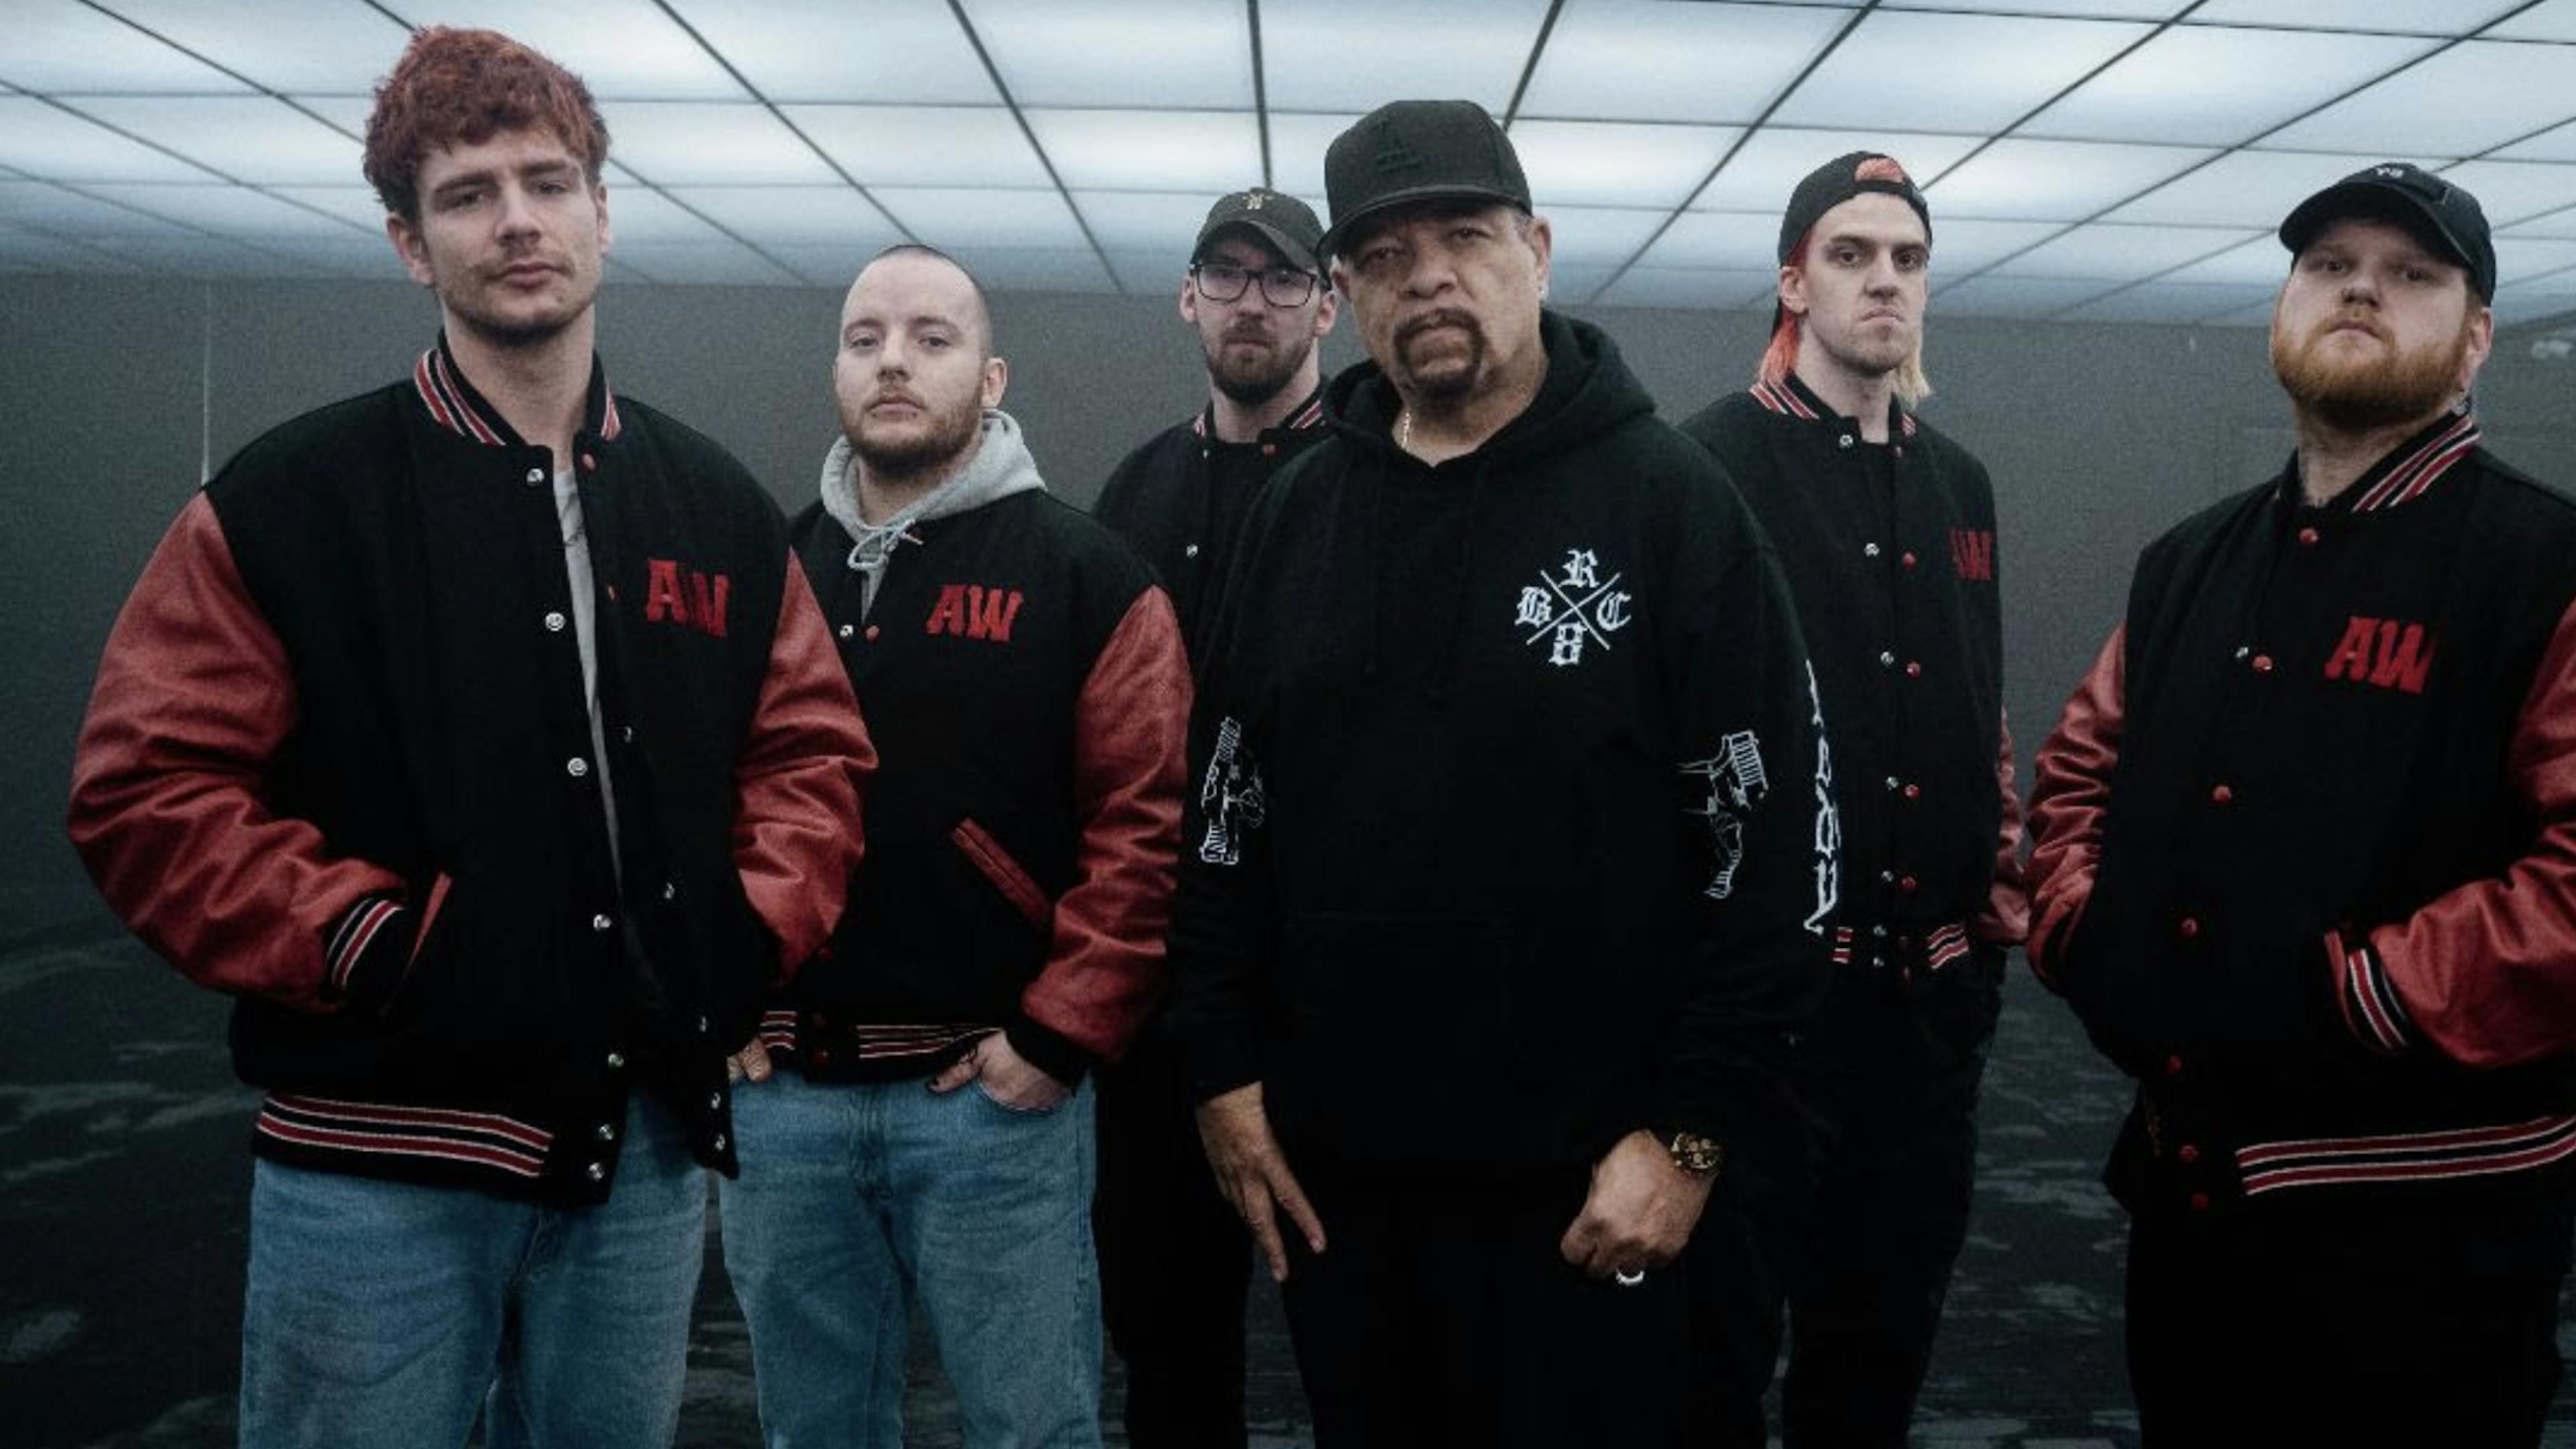 Alpha Wolf “decided to shoot for the stars”, and got Ice-T on their new single